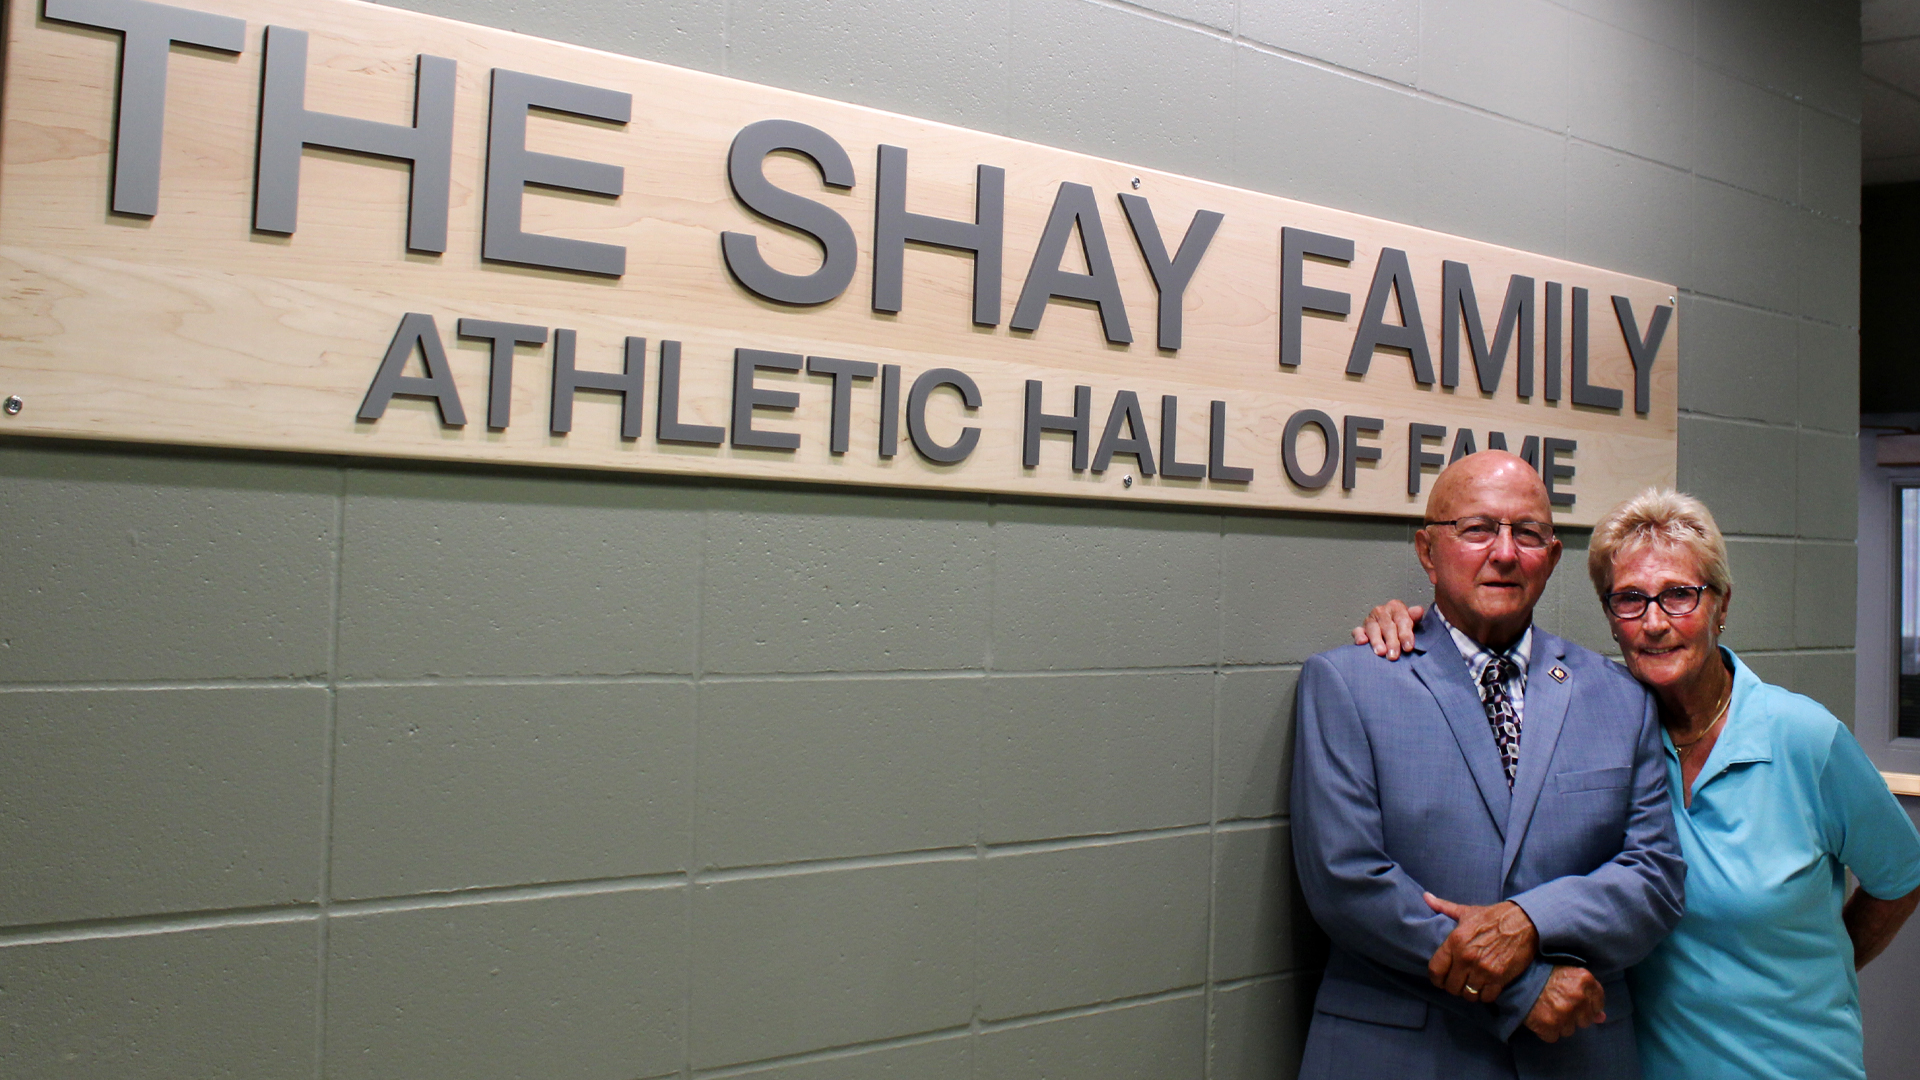 Jon and Linda Shay near The Shay Family Athletic Hall of Fame sign.